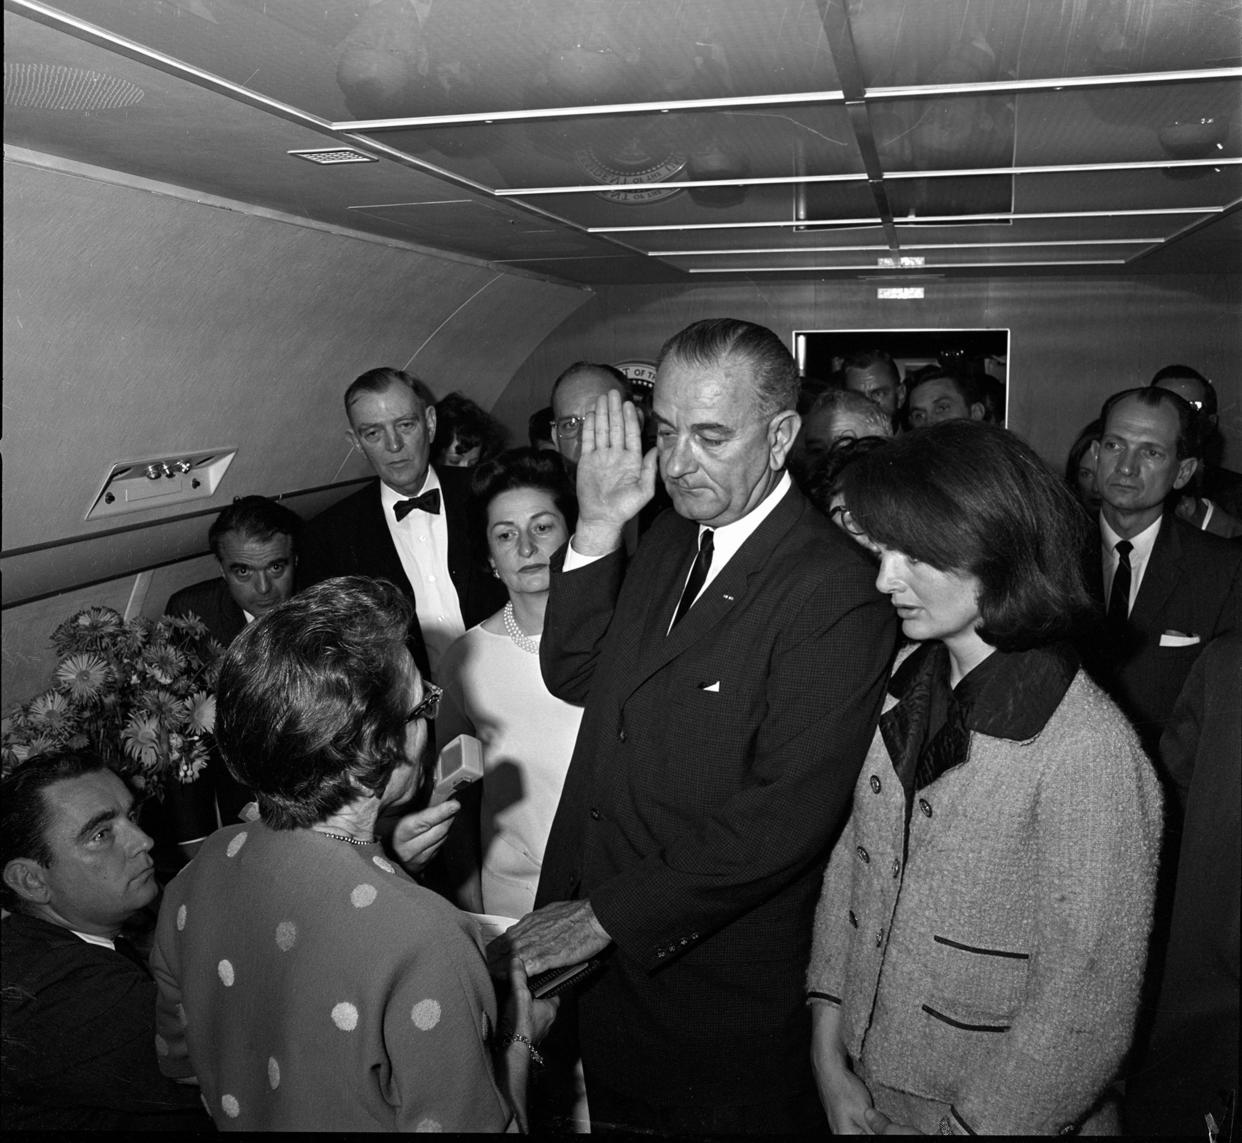 Lyndon Johnson takes the oath of office aboard Air Force One after the assassination of John F. Kennedy.